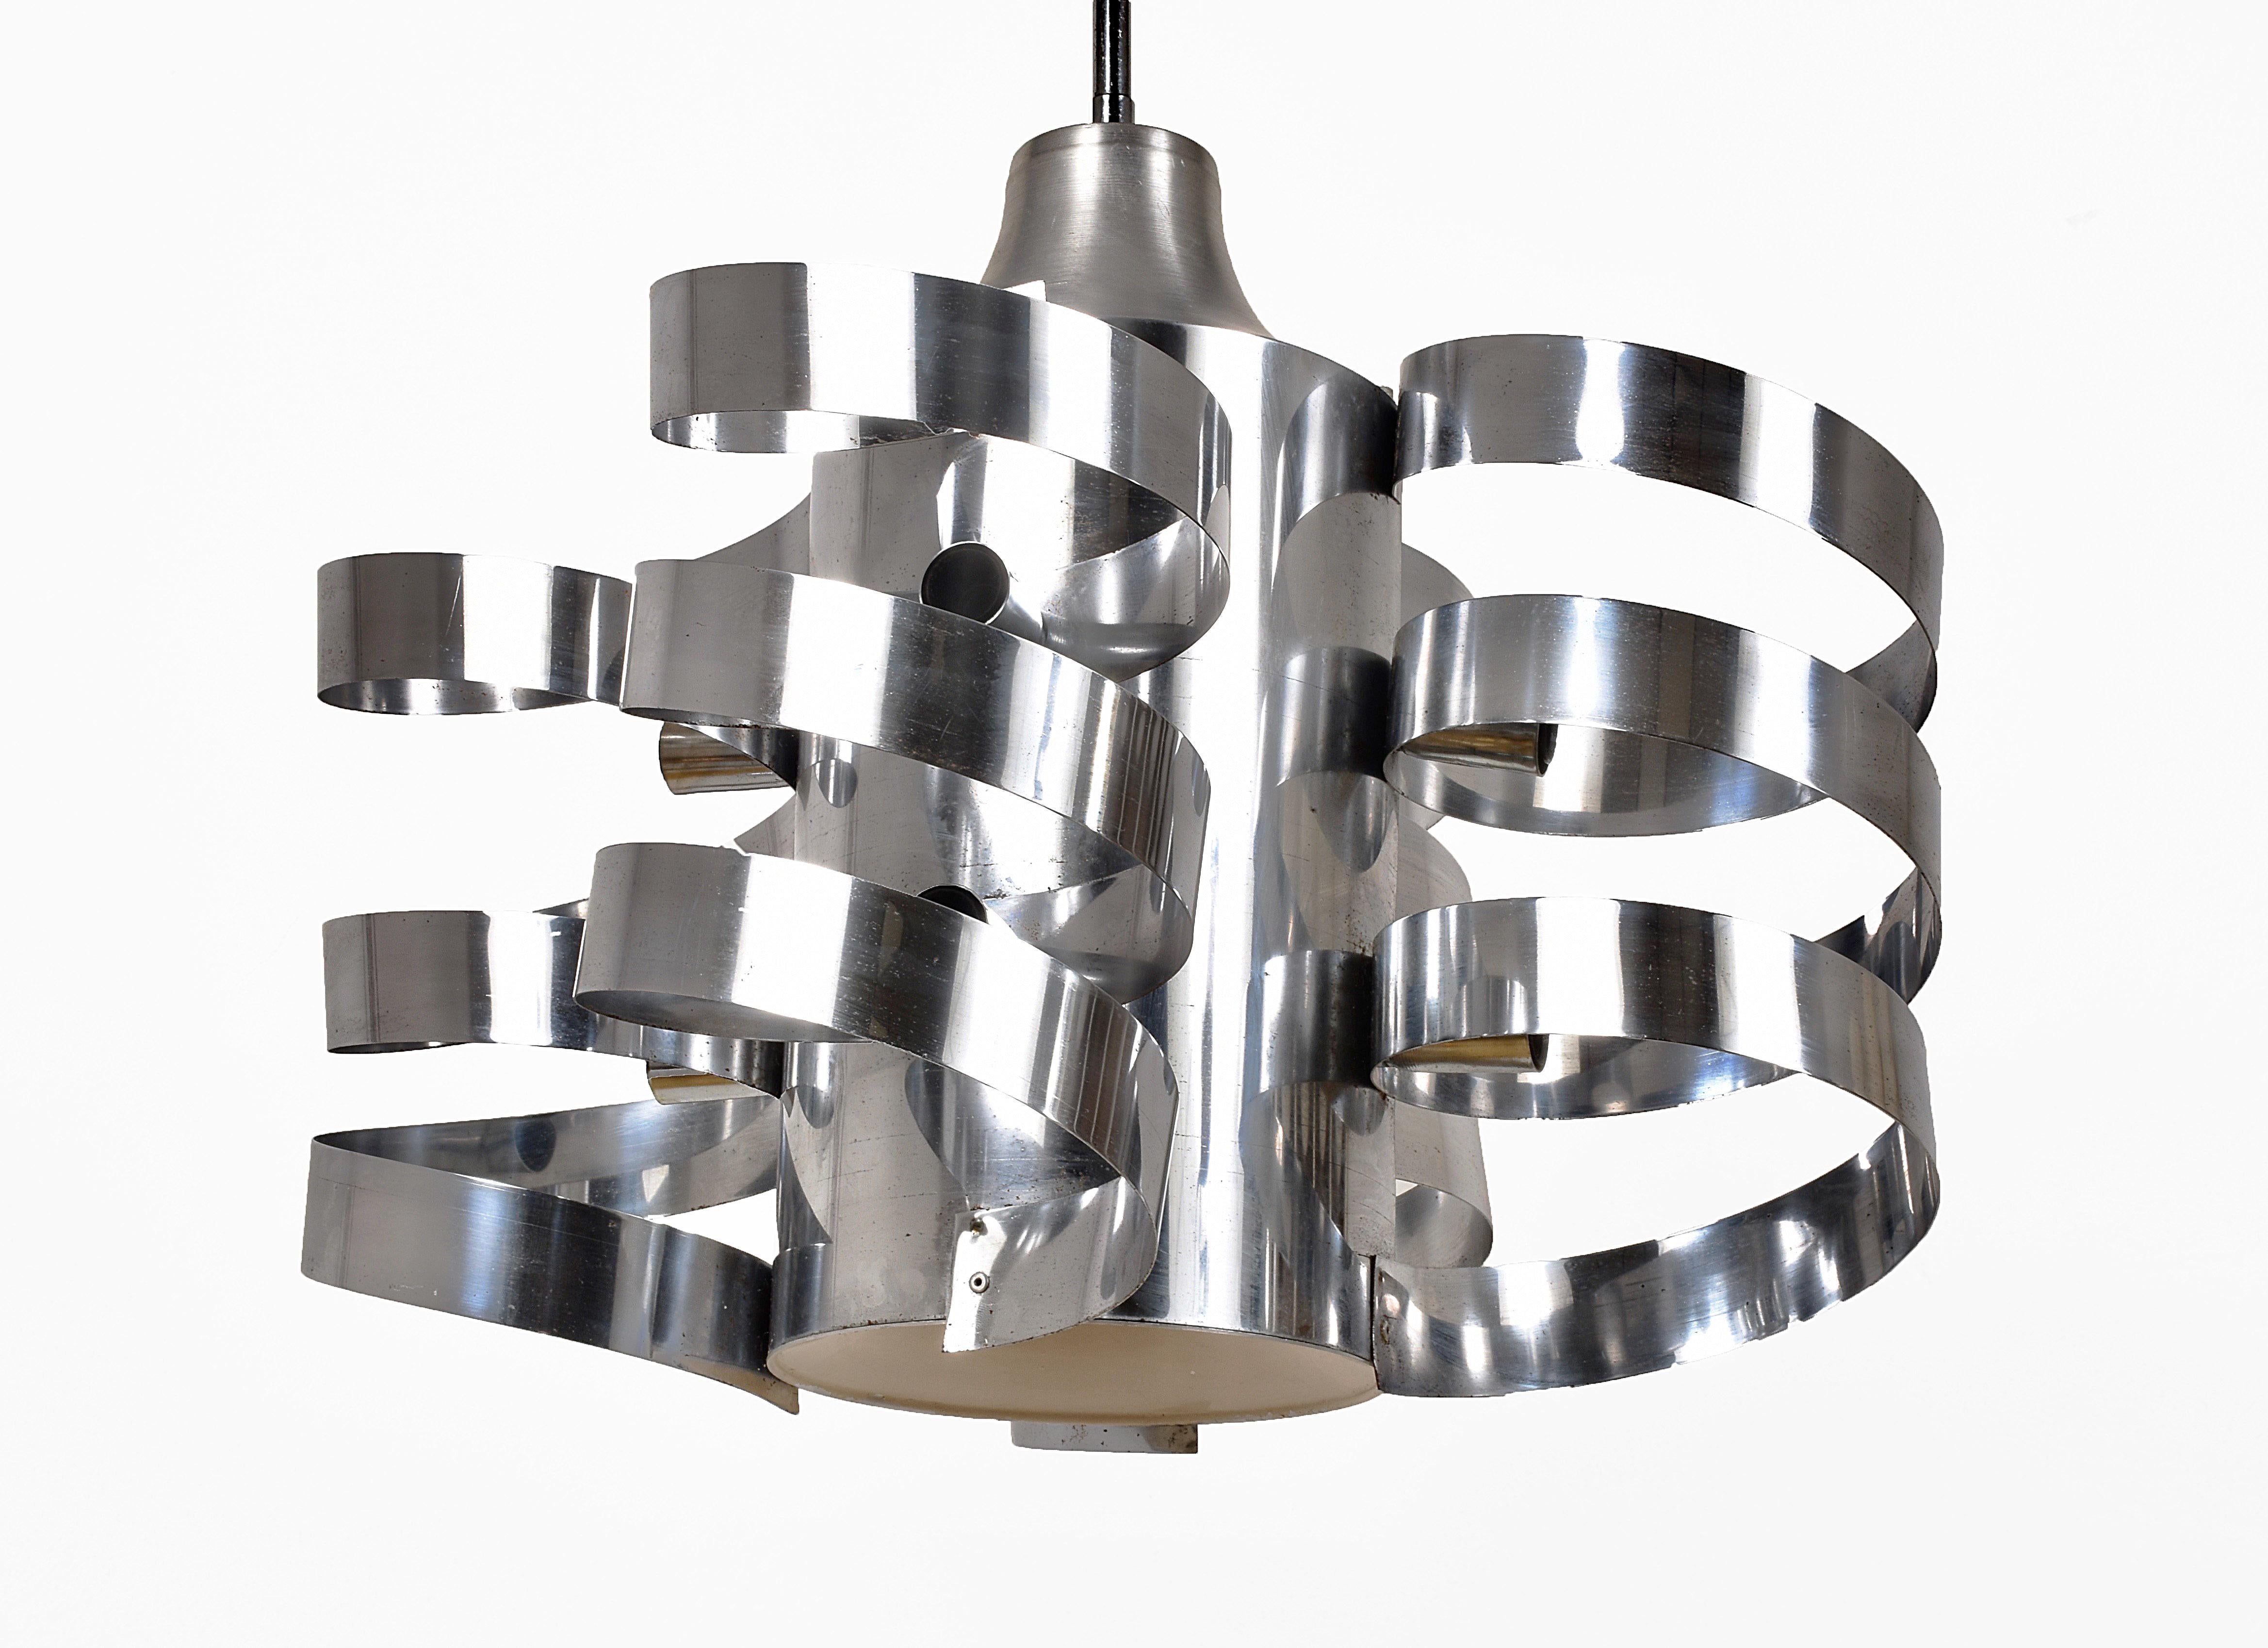 Cyclone chandelier, in chromed steel and aluminum. Eight-light pendant. Attributed to Max Sauze for Sciolari.